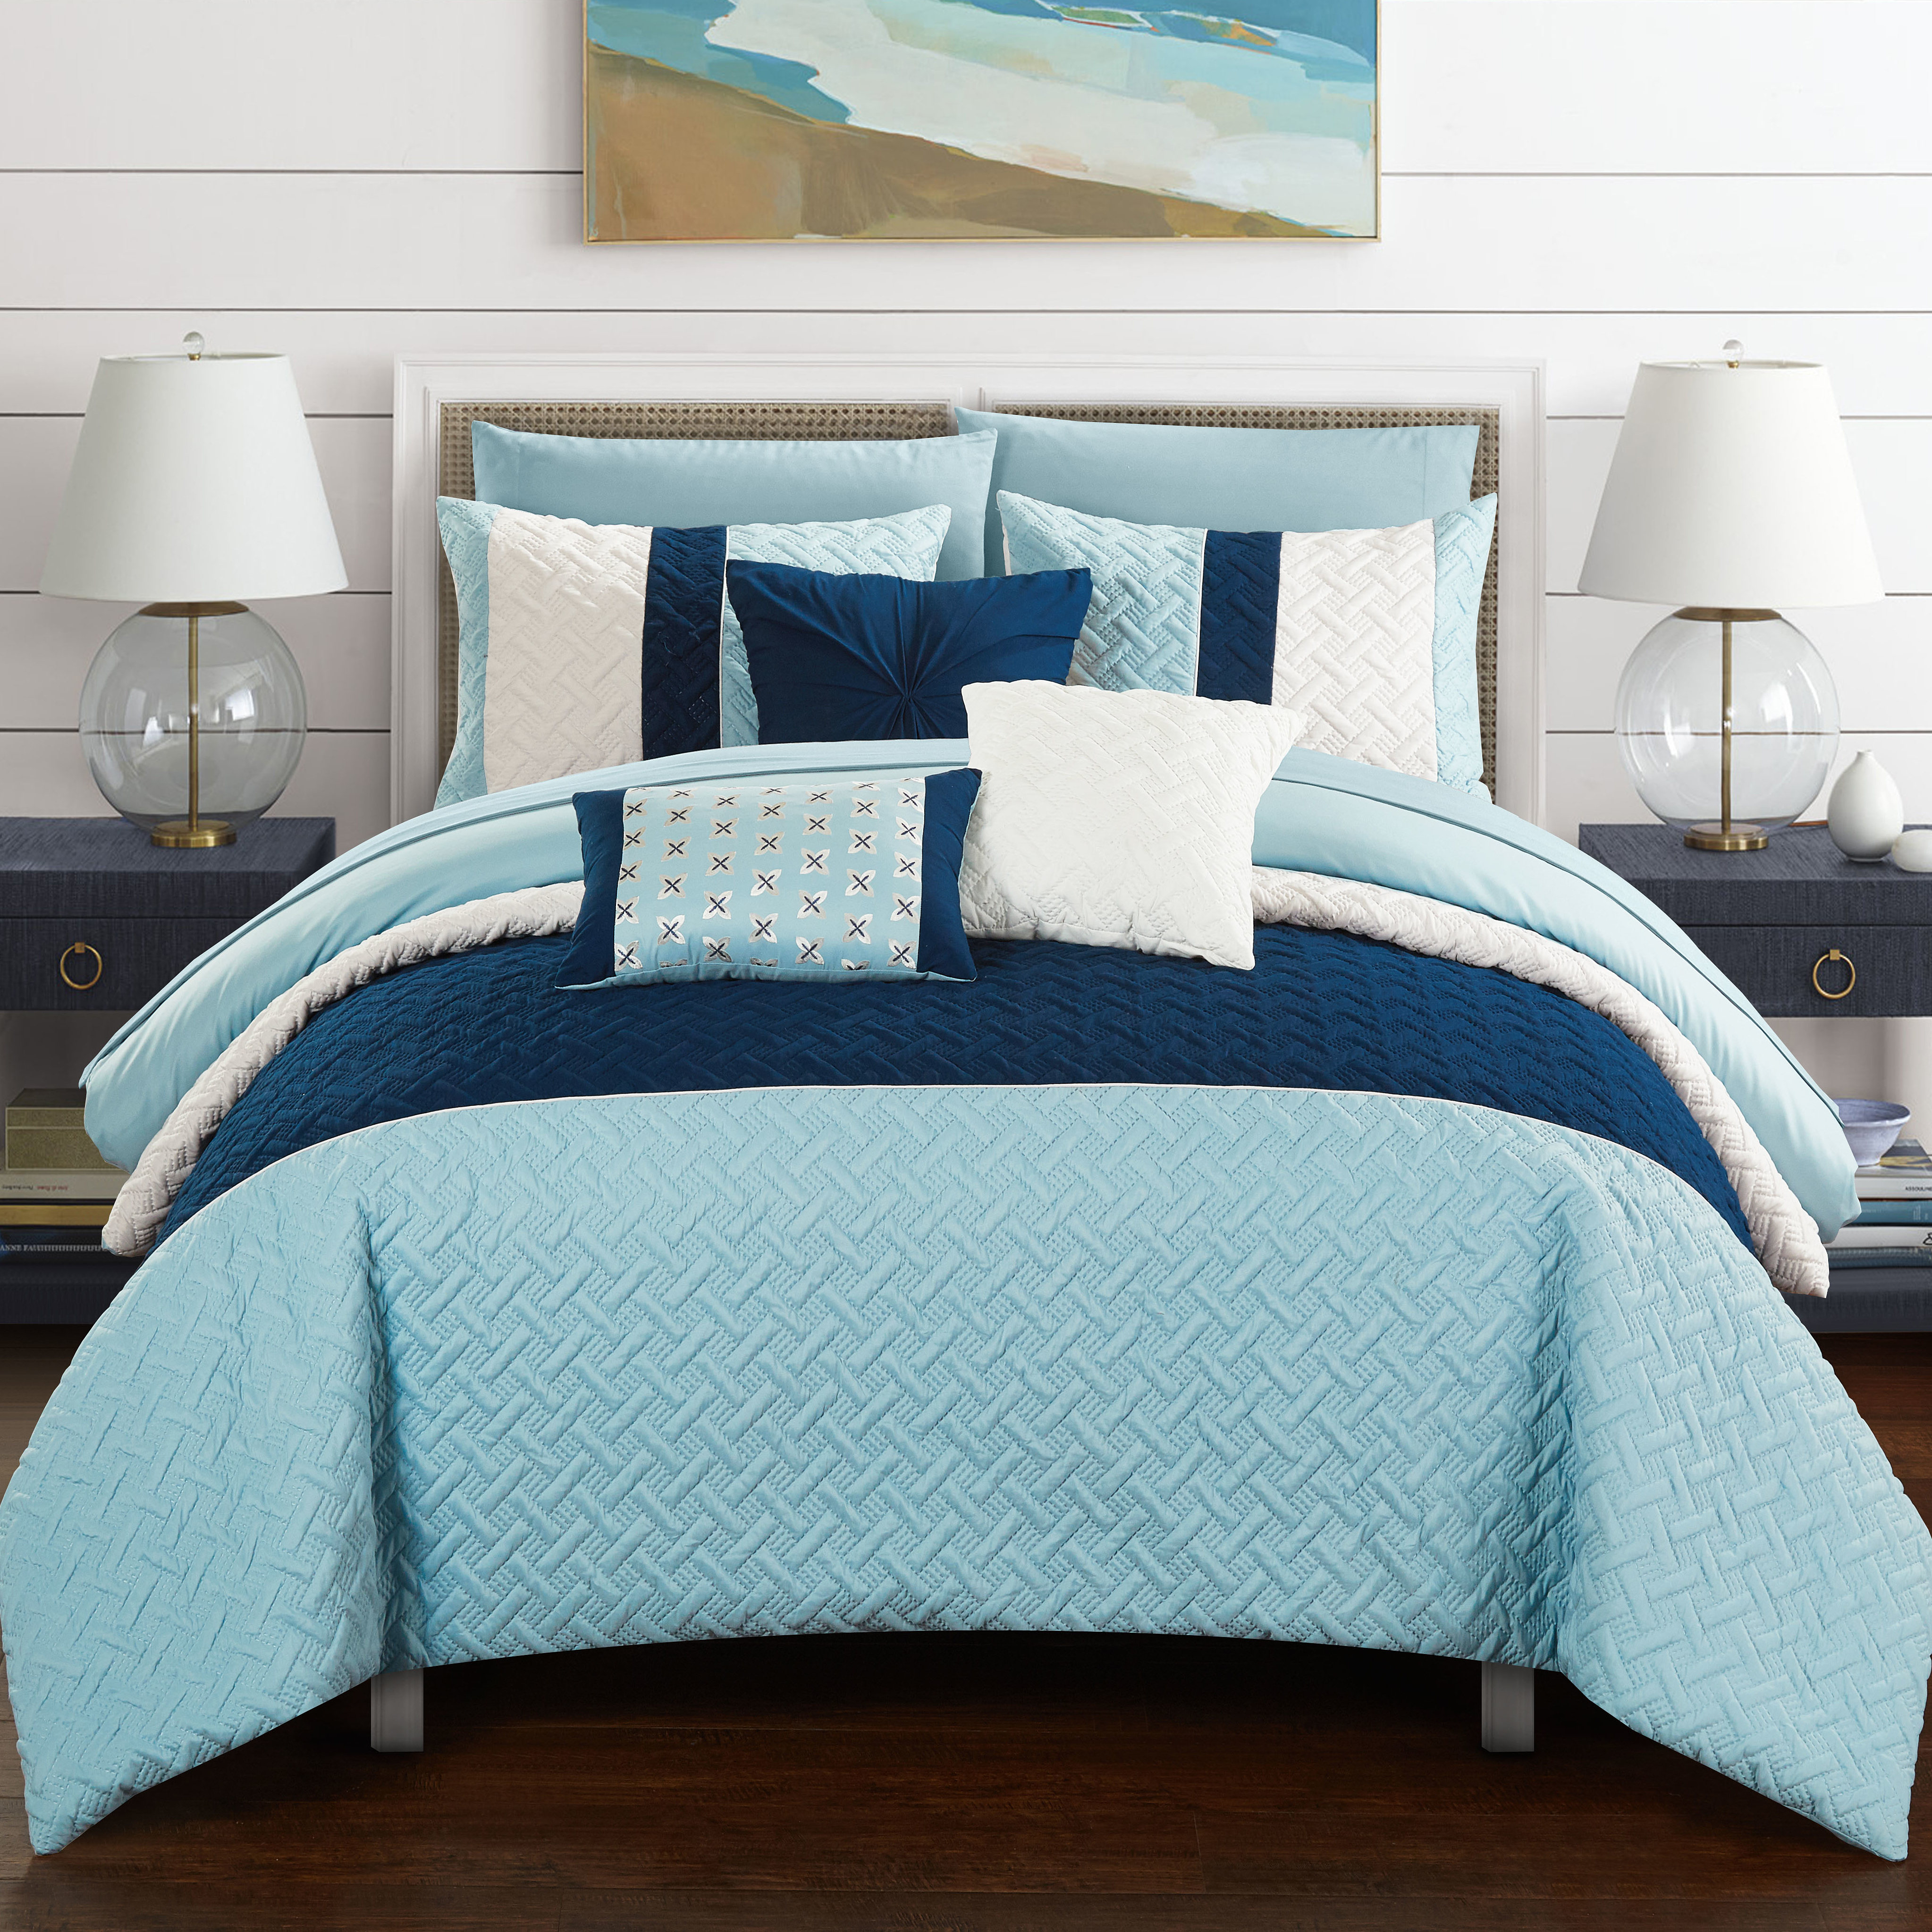 Chic Home Shaila 10 Or 8 Piece Comforter Set Color Block Quilted Embroidered Design Bed In A Bag Bedding - Blue, Twin